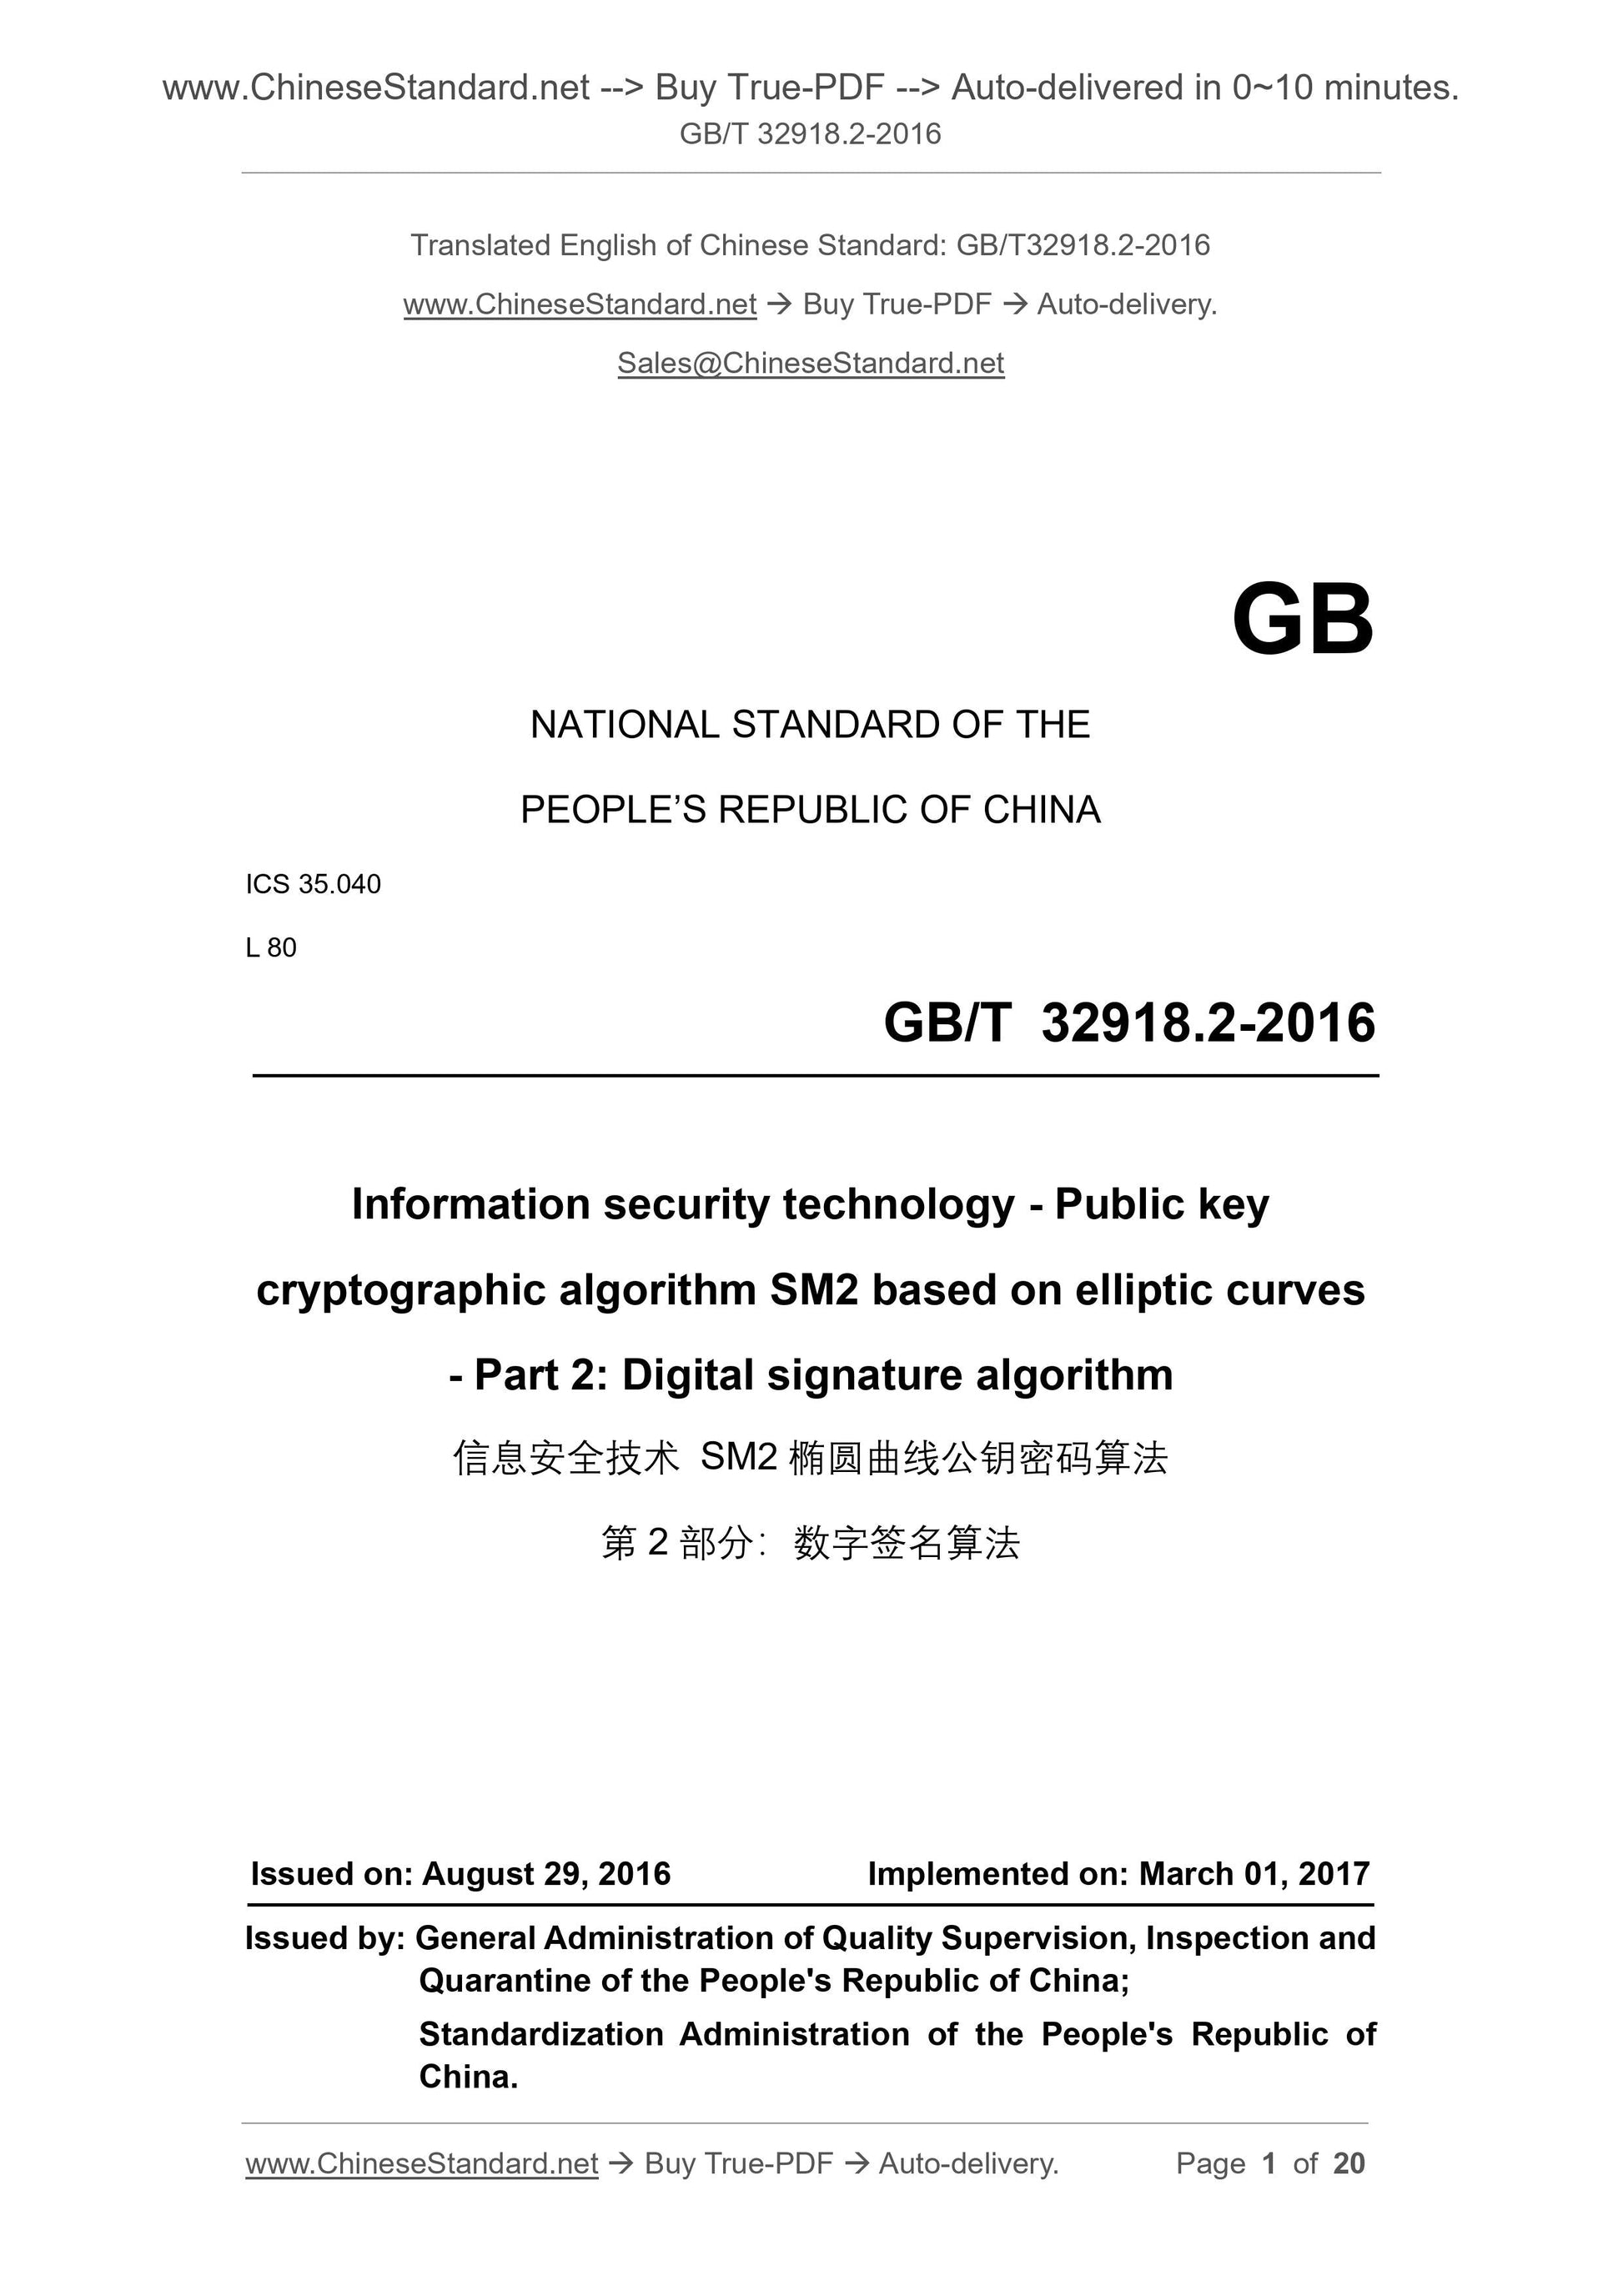 GB/T 32918.2-2016 Page 1